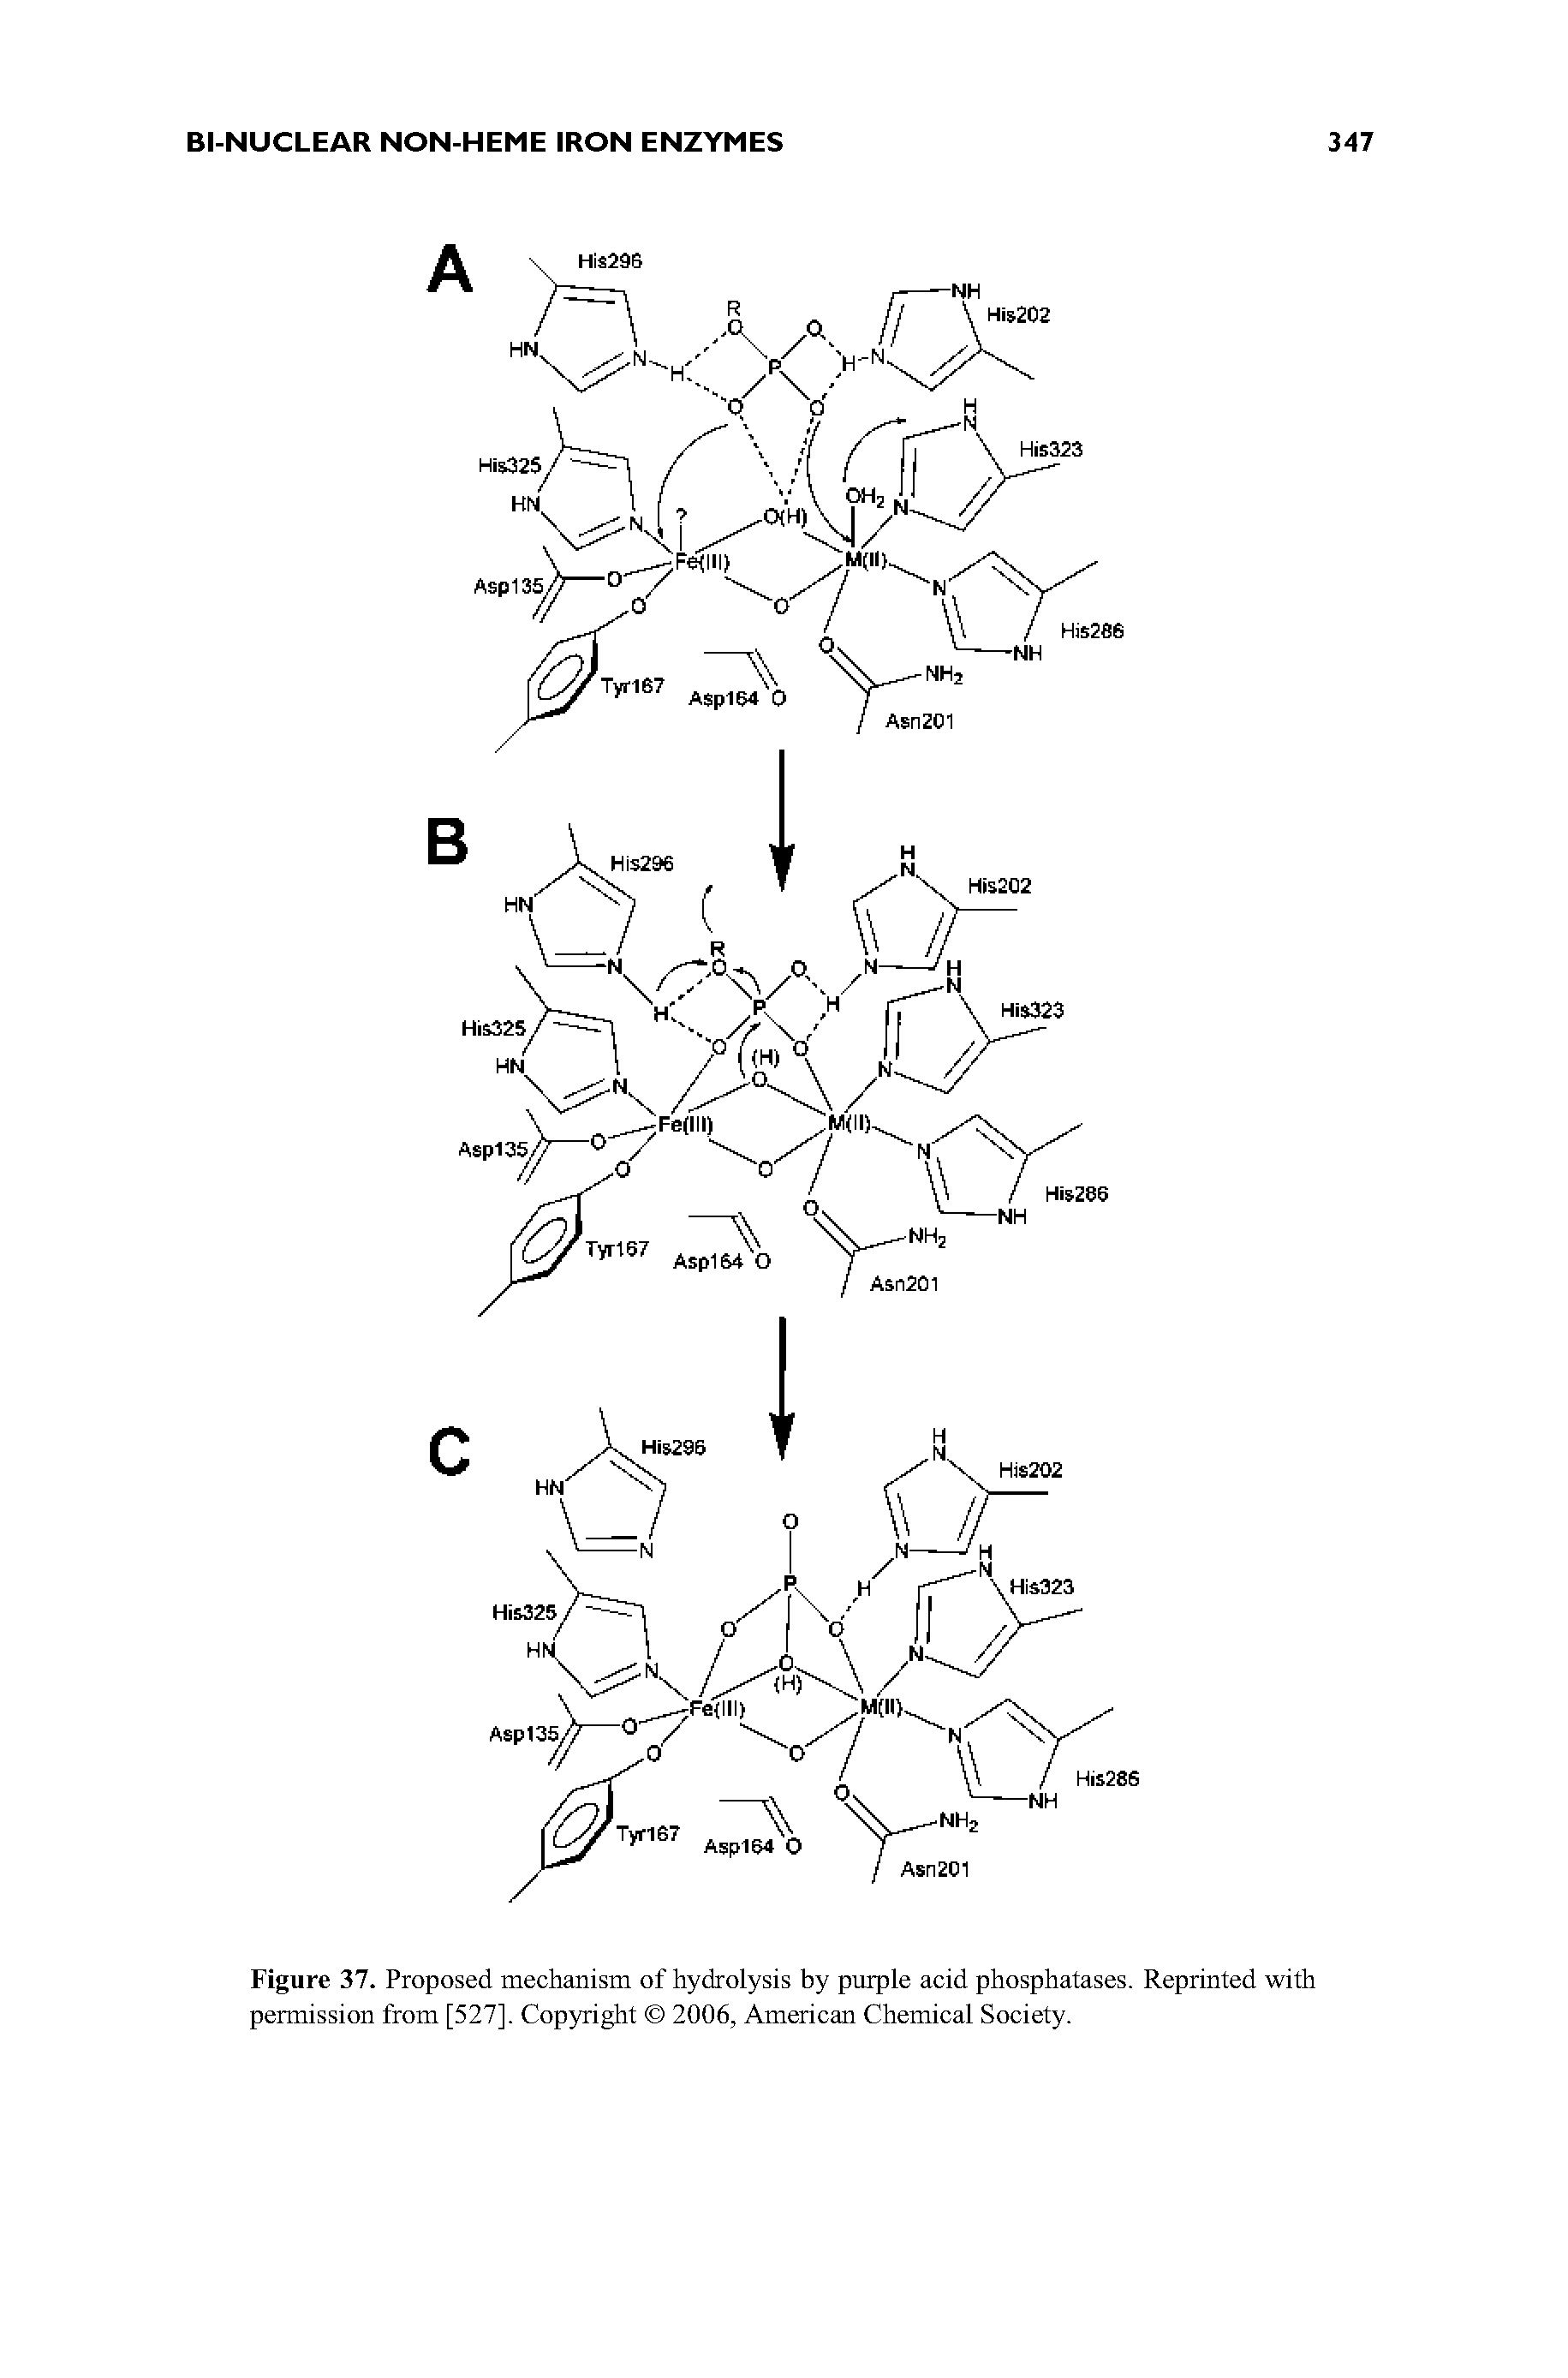 Figure 37. Proposed mechanism of hydrolysis by purple acid phosphatases. Reprinted with permission from [527]. Copyright 2006, American Chemical Society.